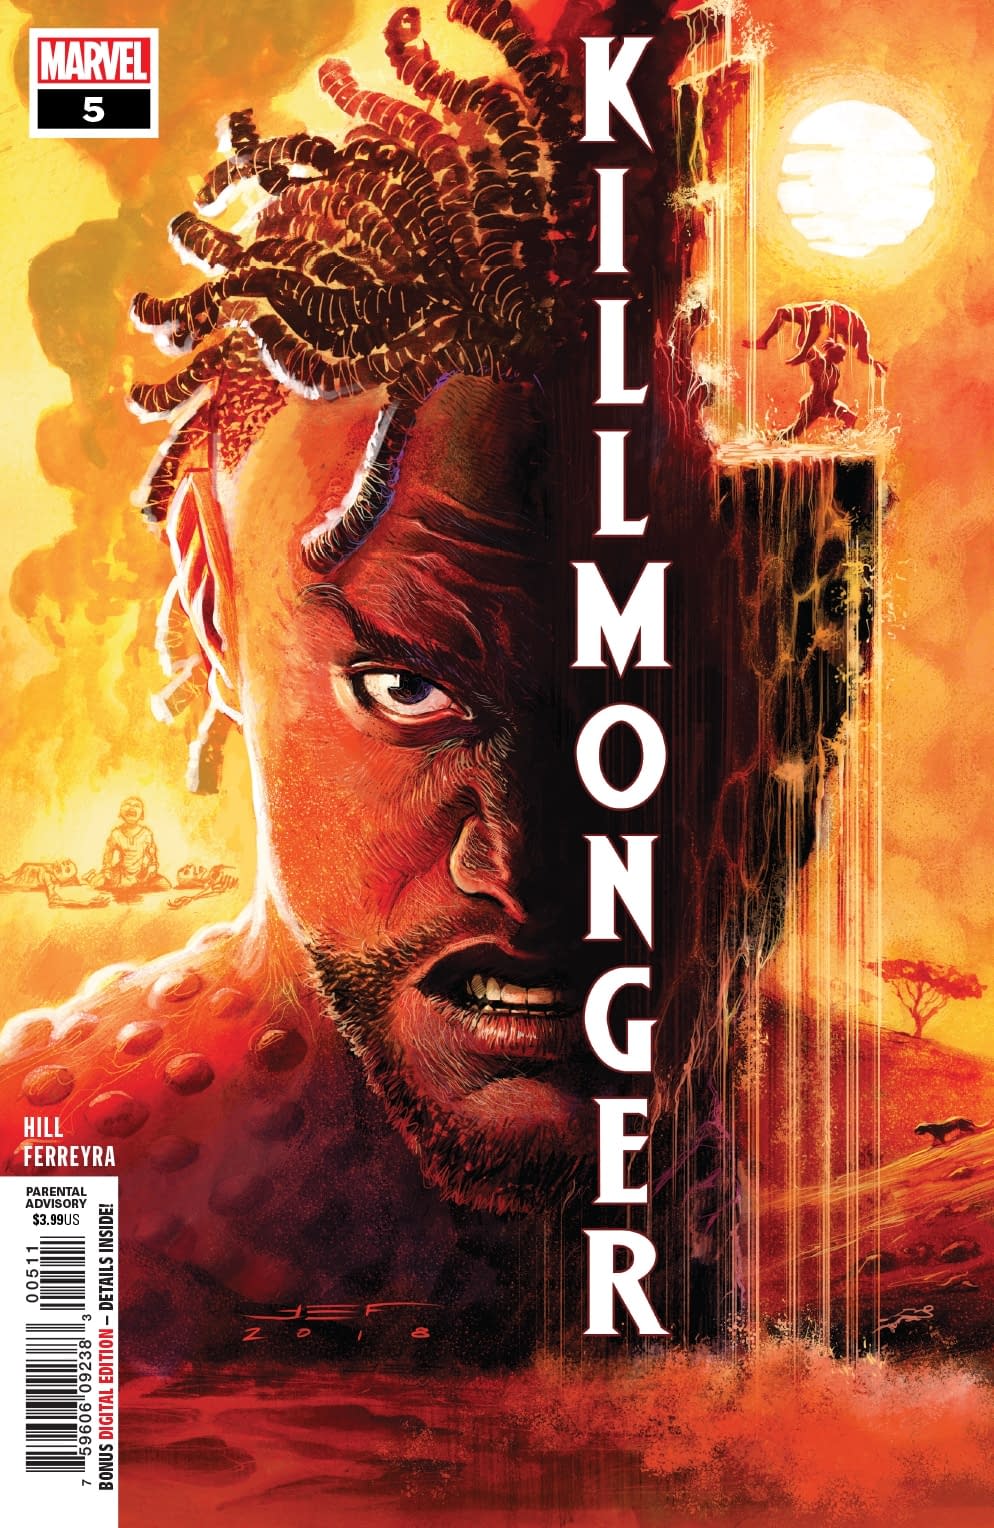 Revenge is a Dish Best Served Cold and British in Next Week's Killmonger Finale